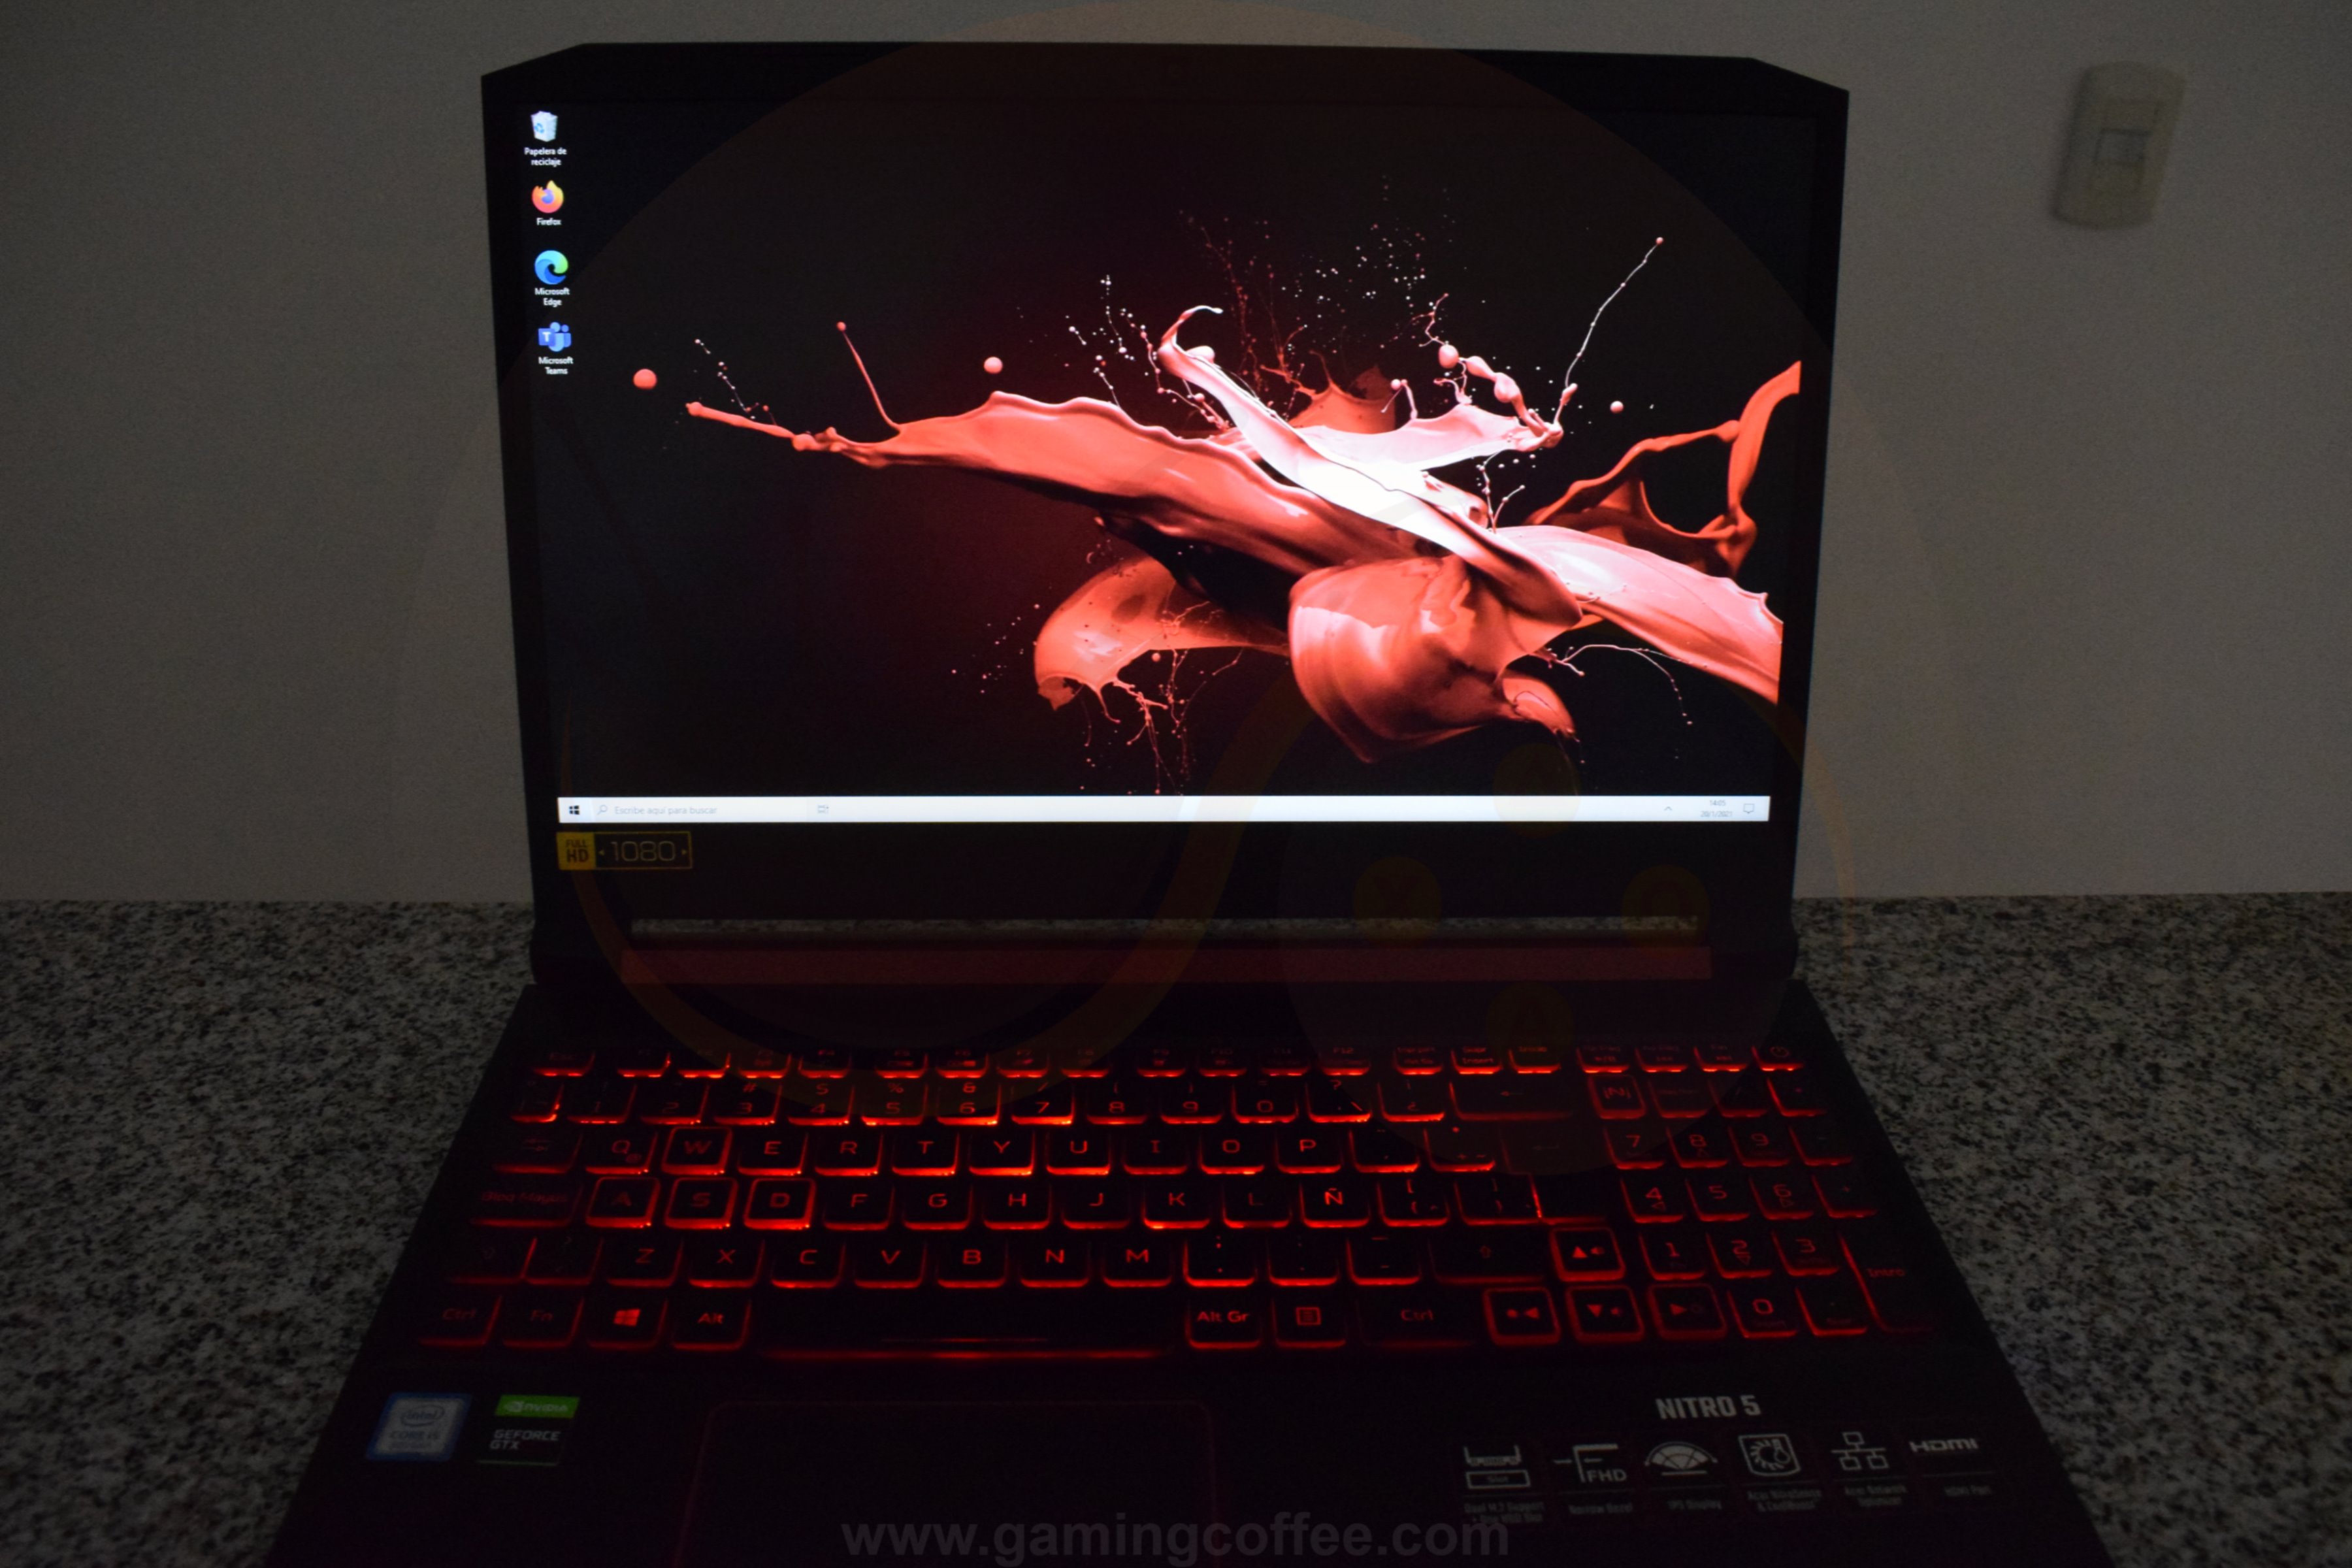 Review] - Acer Nitro 5 - Gaming Coffee